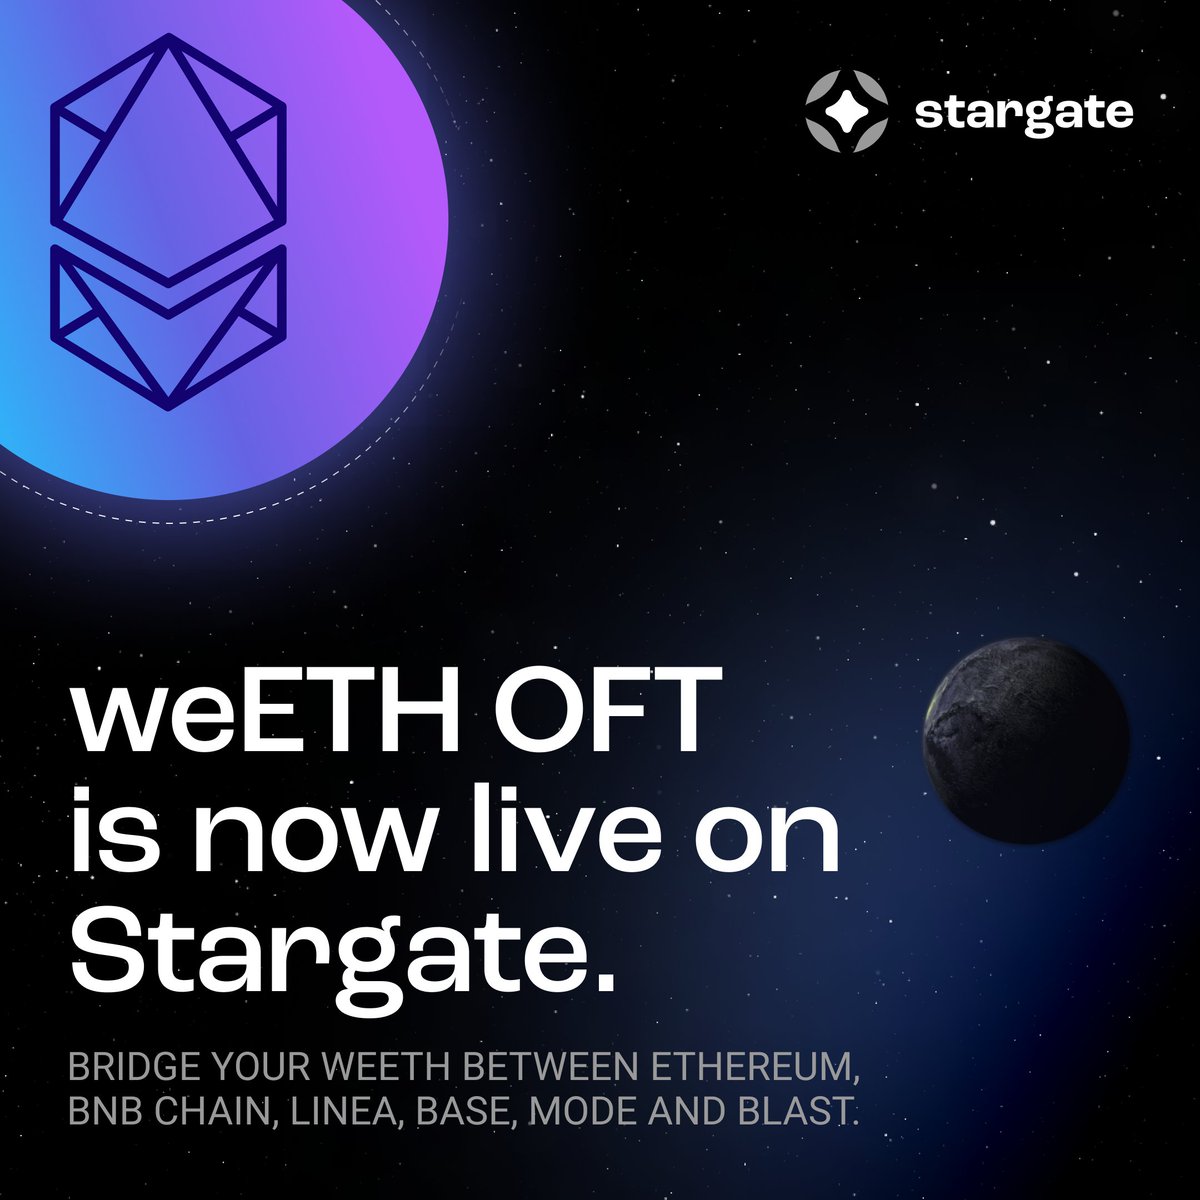 Stargate is now the home for bridging omnichain $weETH, as @ether_fi have launched their native L2 restaking module, and made $weETH an OFT. ether.fi have added a tutorial on how to use Stargate for bridging to their documentation, try it out 👇